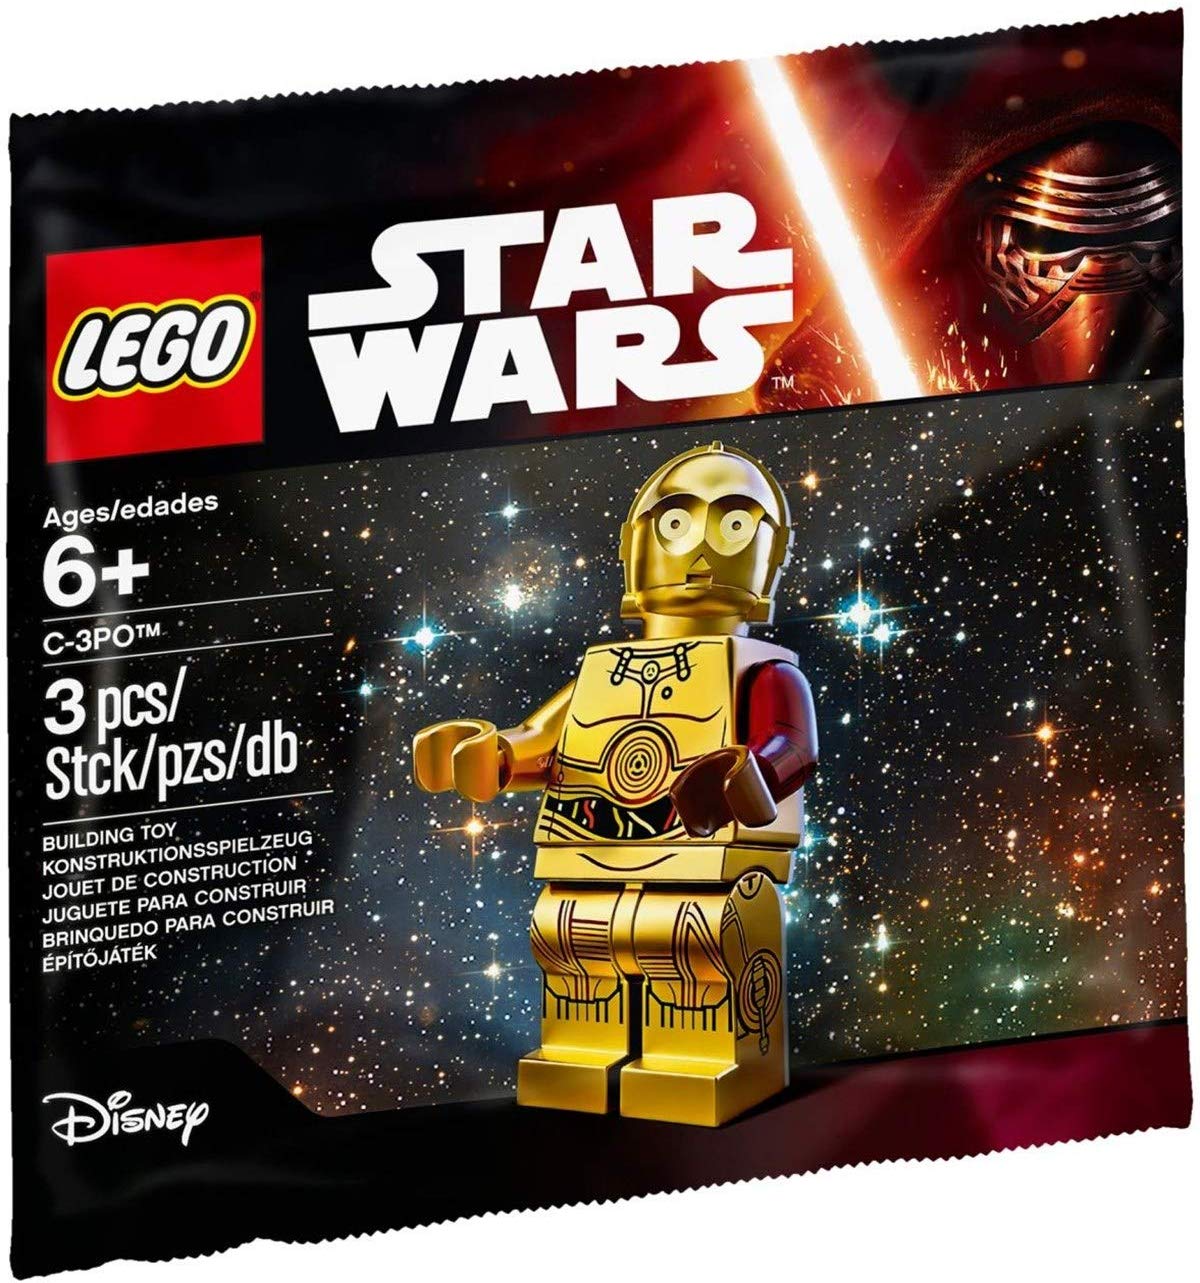 Lego(R) Star Wars C-3Po Minifig 2015 Red Left Arm - The Force Awakens